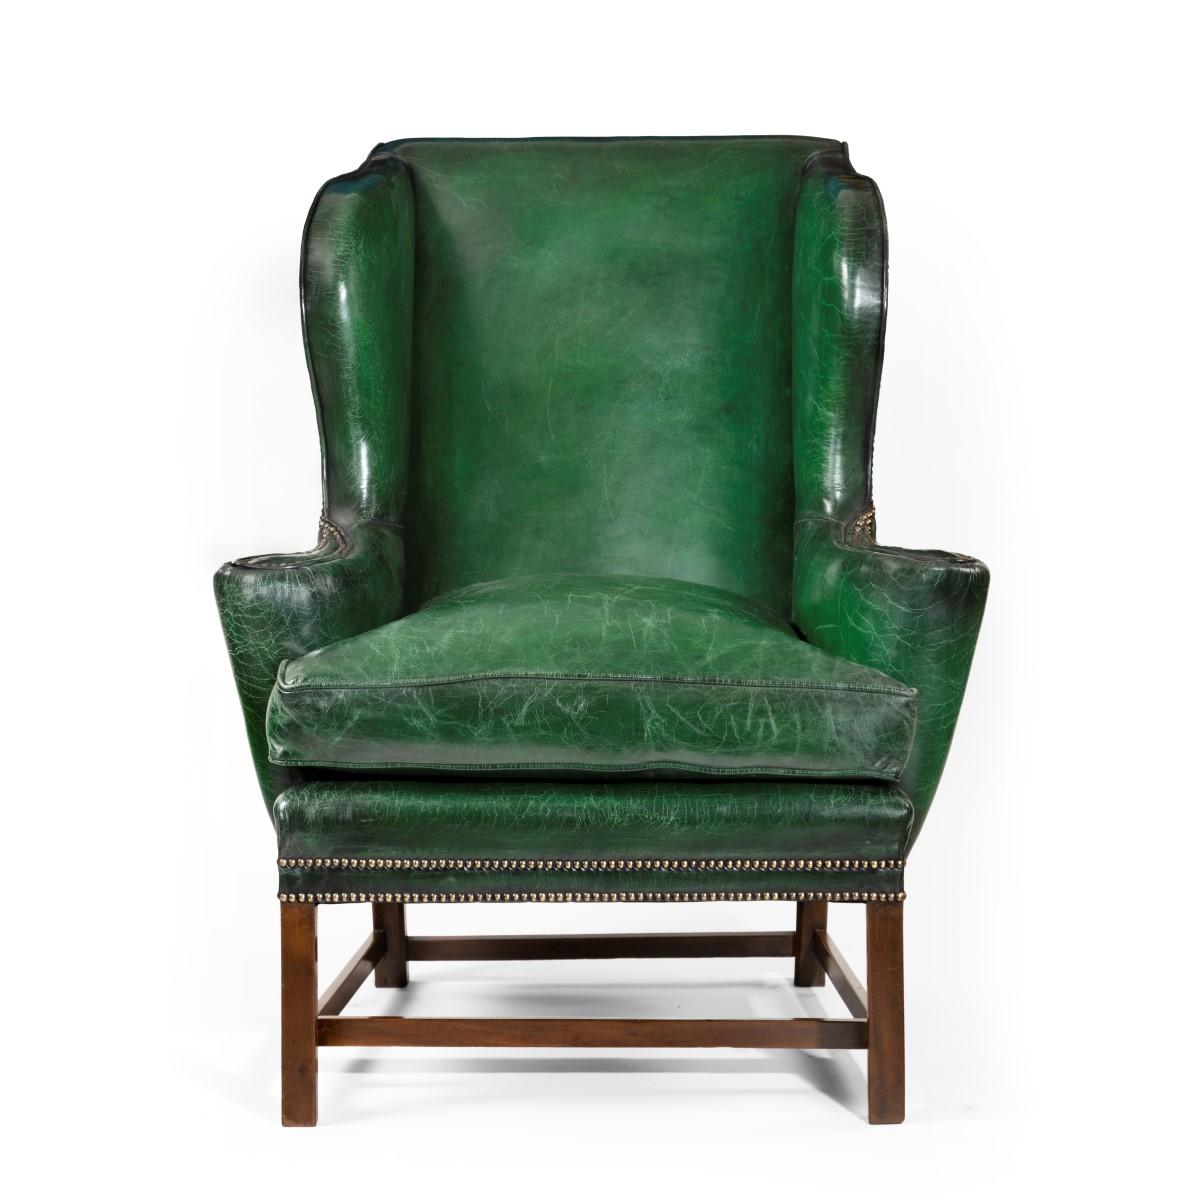 A George III style green leather wing arm chair